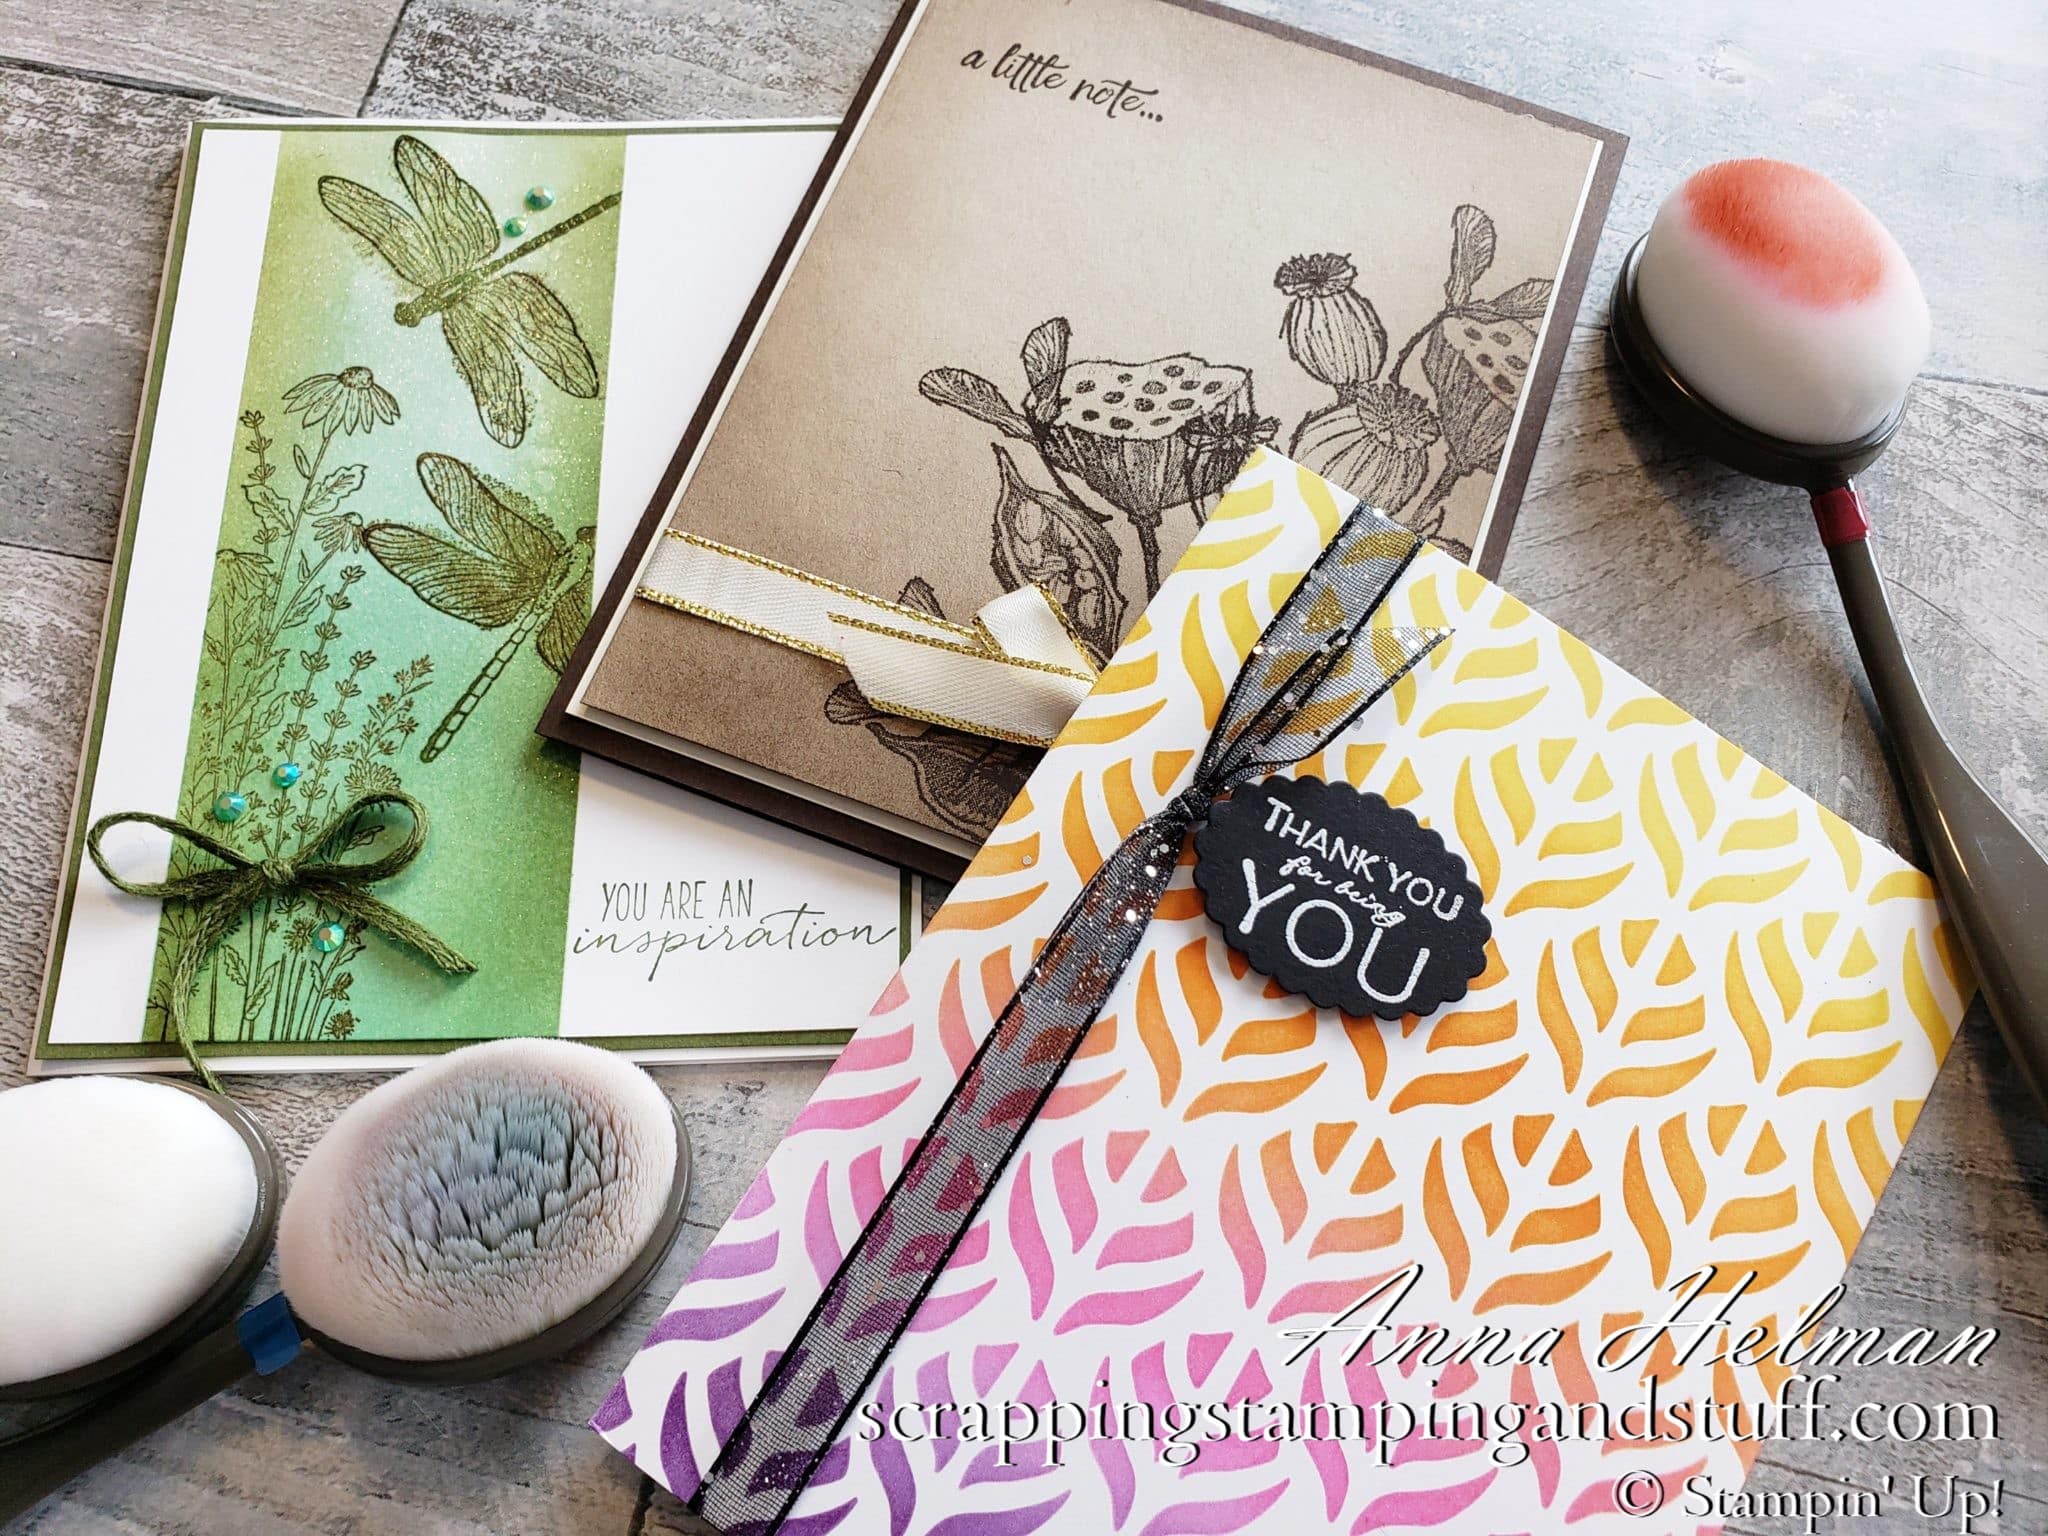 Stampin Up Blending Brushes are an amazing tool for blending ink with soft, even, and beautiful results.